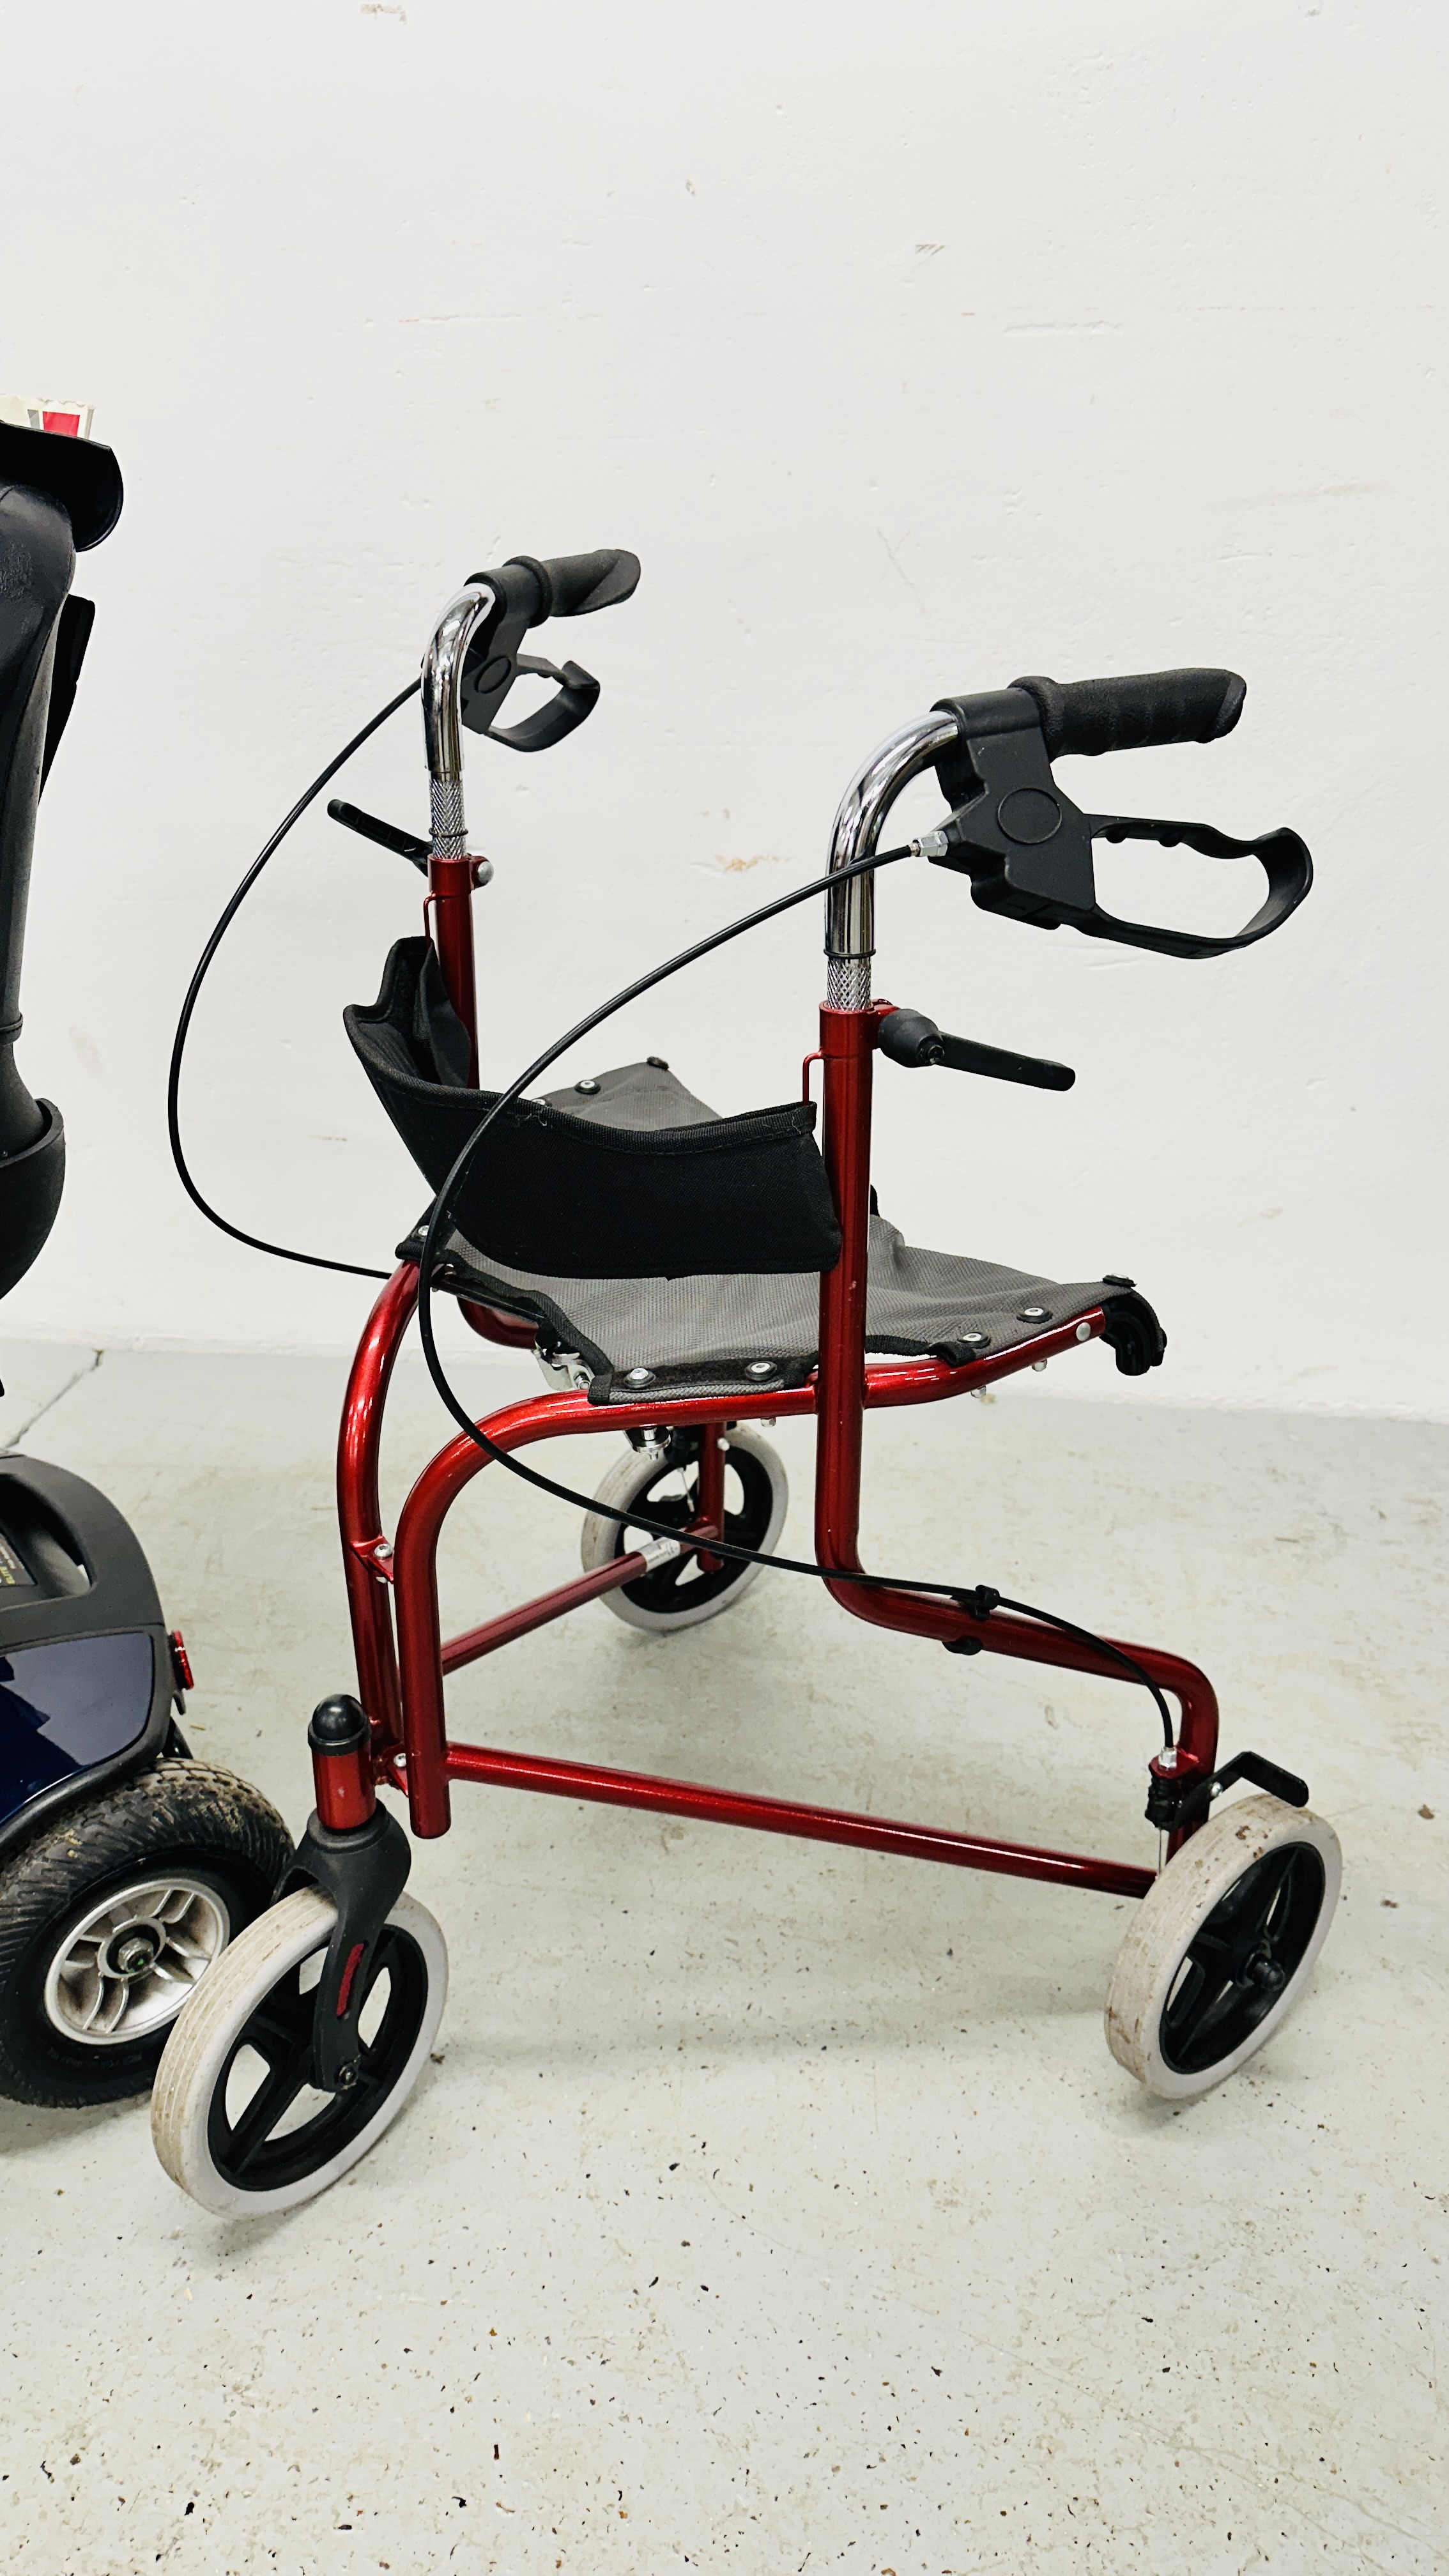 A GOGO ELITE TRAVELLER PLUS ELECTRIC MOBILITY SCOOTER COMPLETE WITH MANUAL, - Image 11 of 14